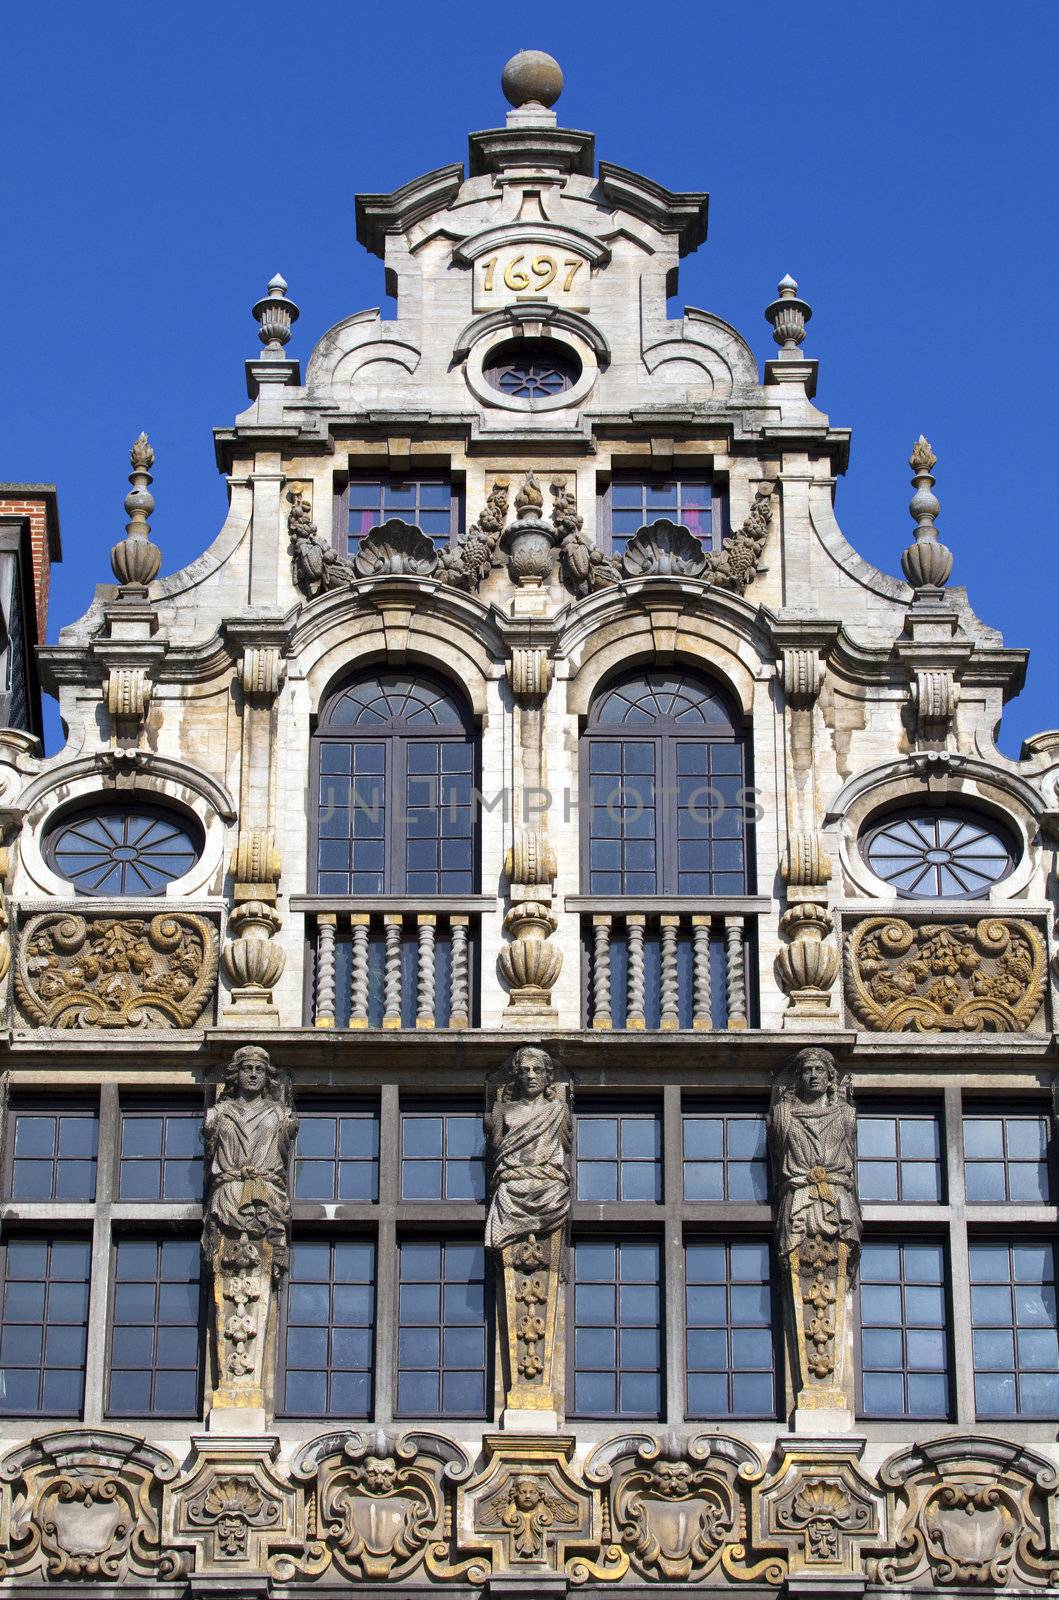 One of the Guildhalls in the Grand Place in Brussels, Belgium.